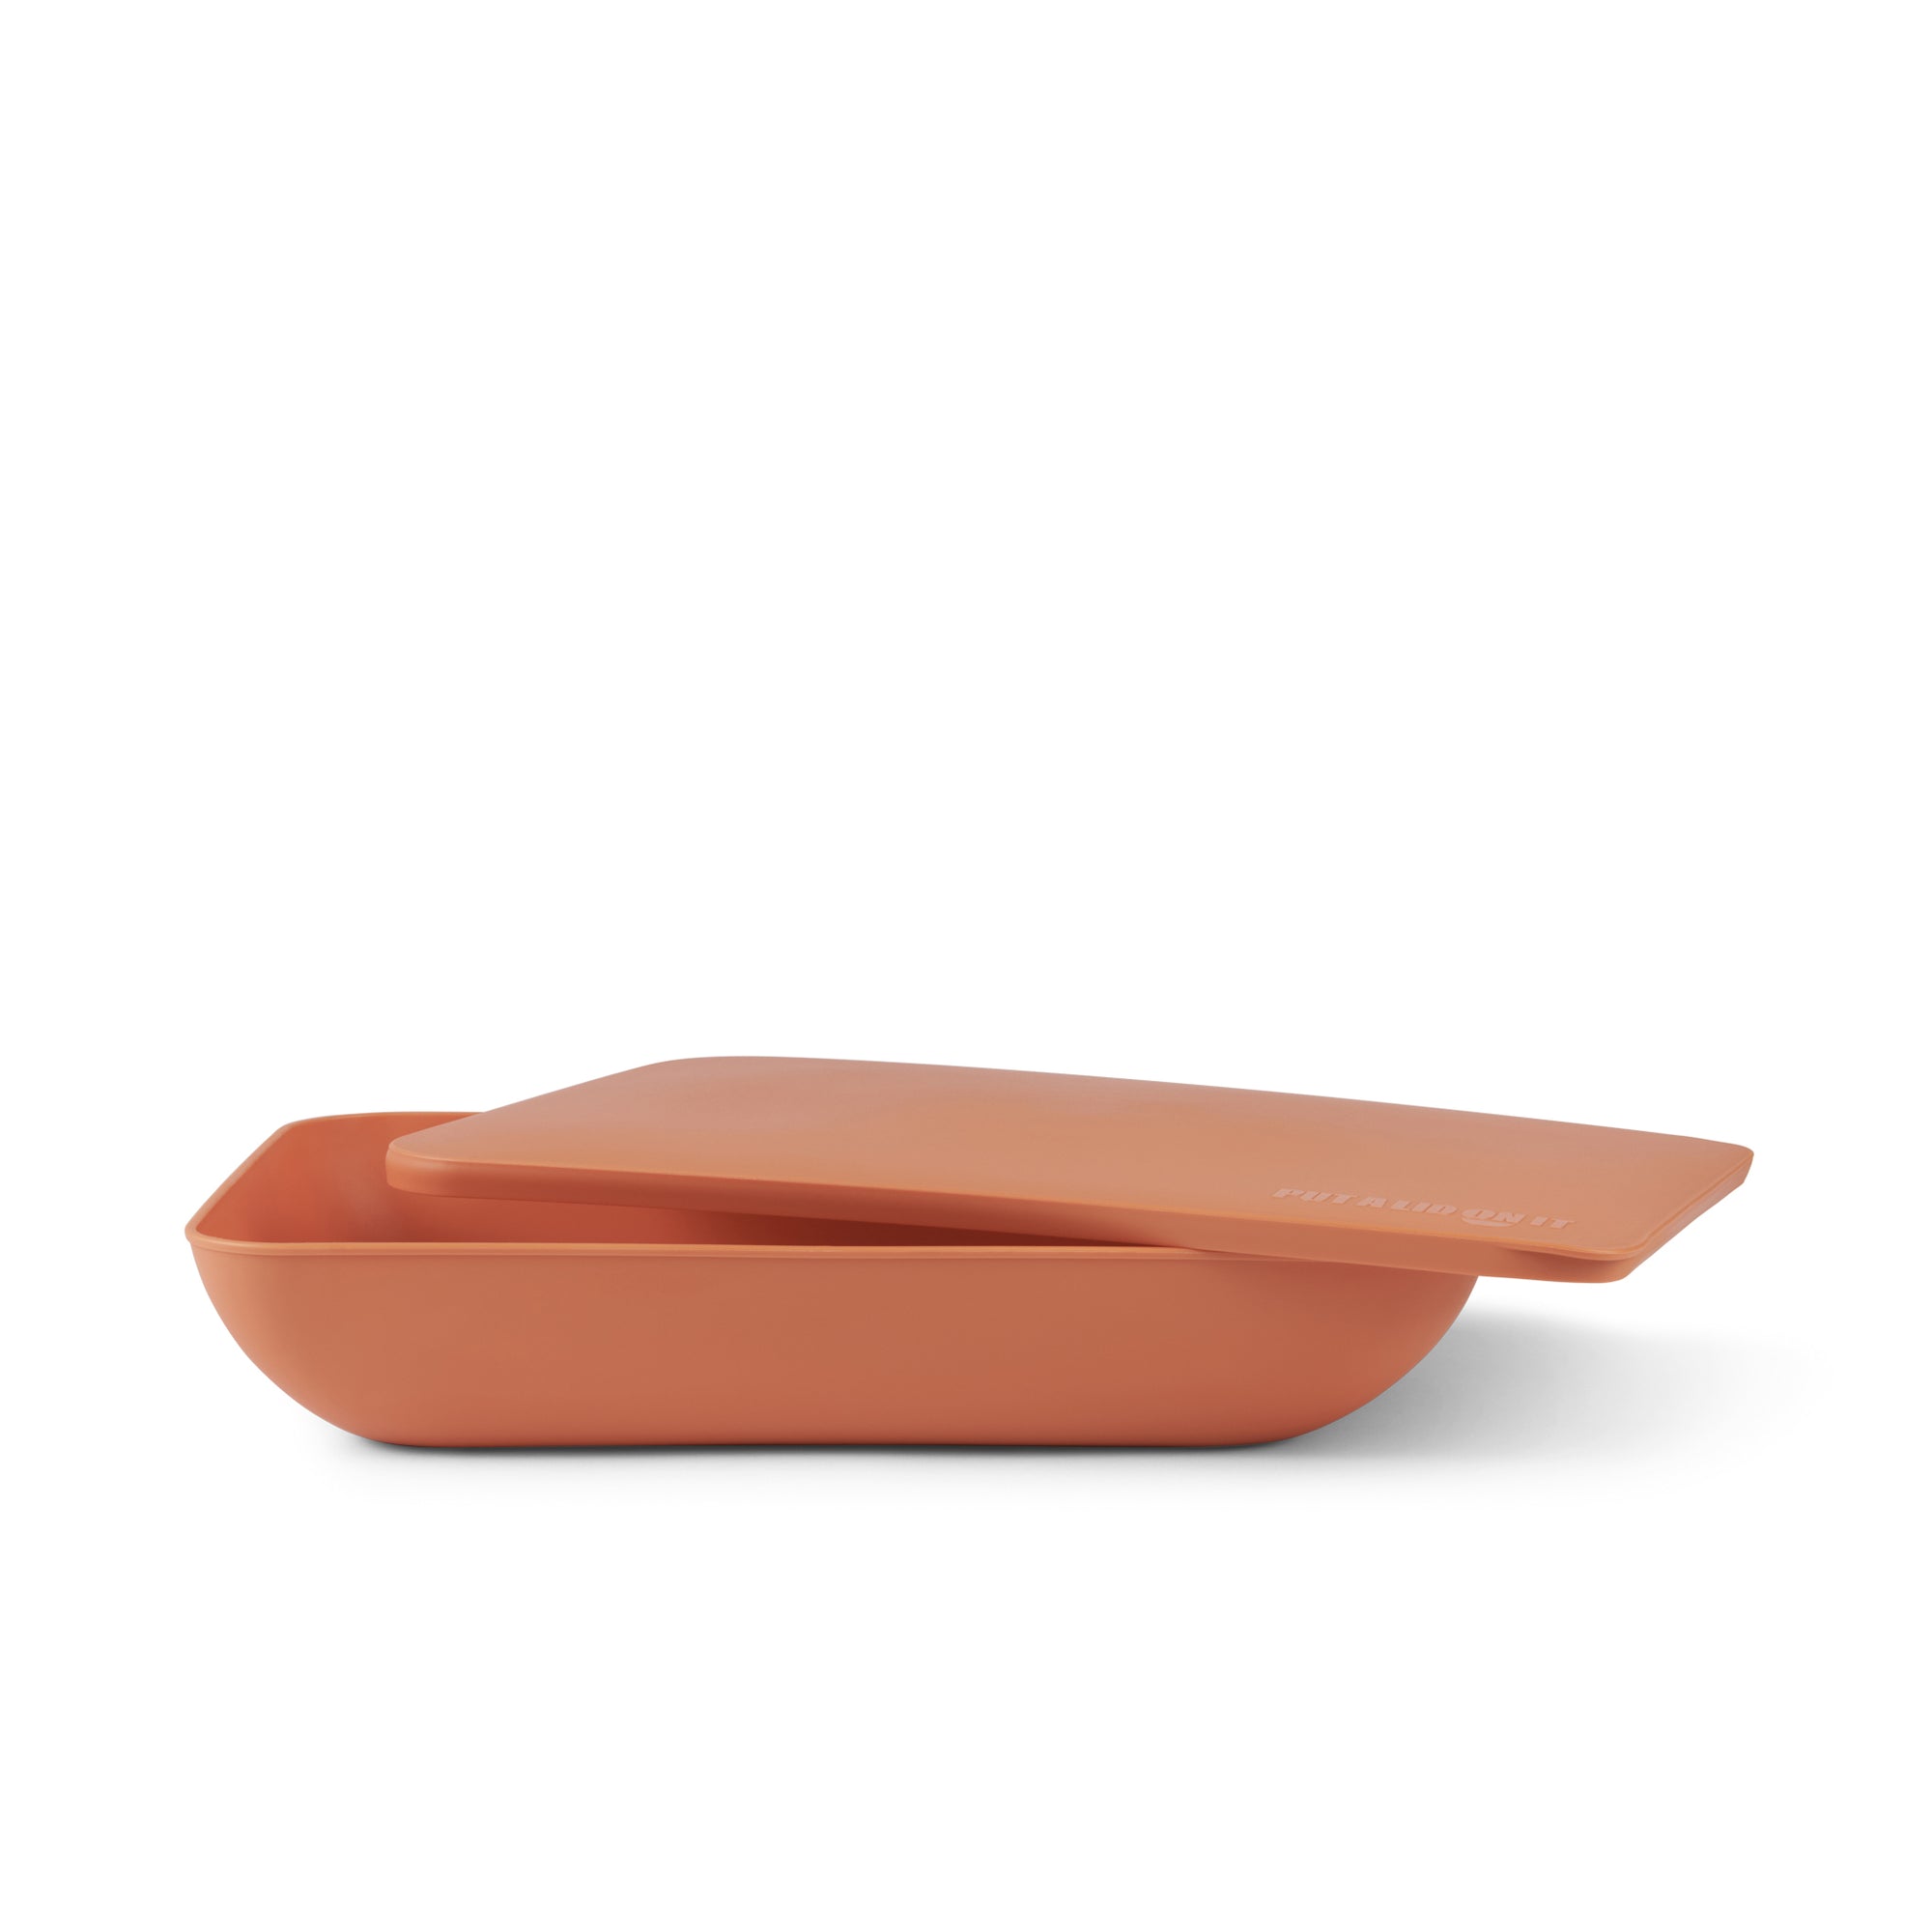 Put a lid on it - Serving platter with a lid - Papaya